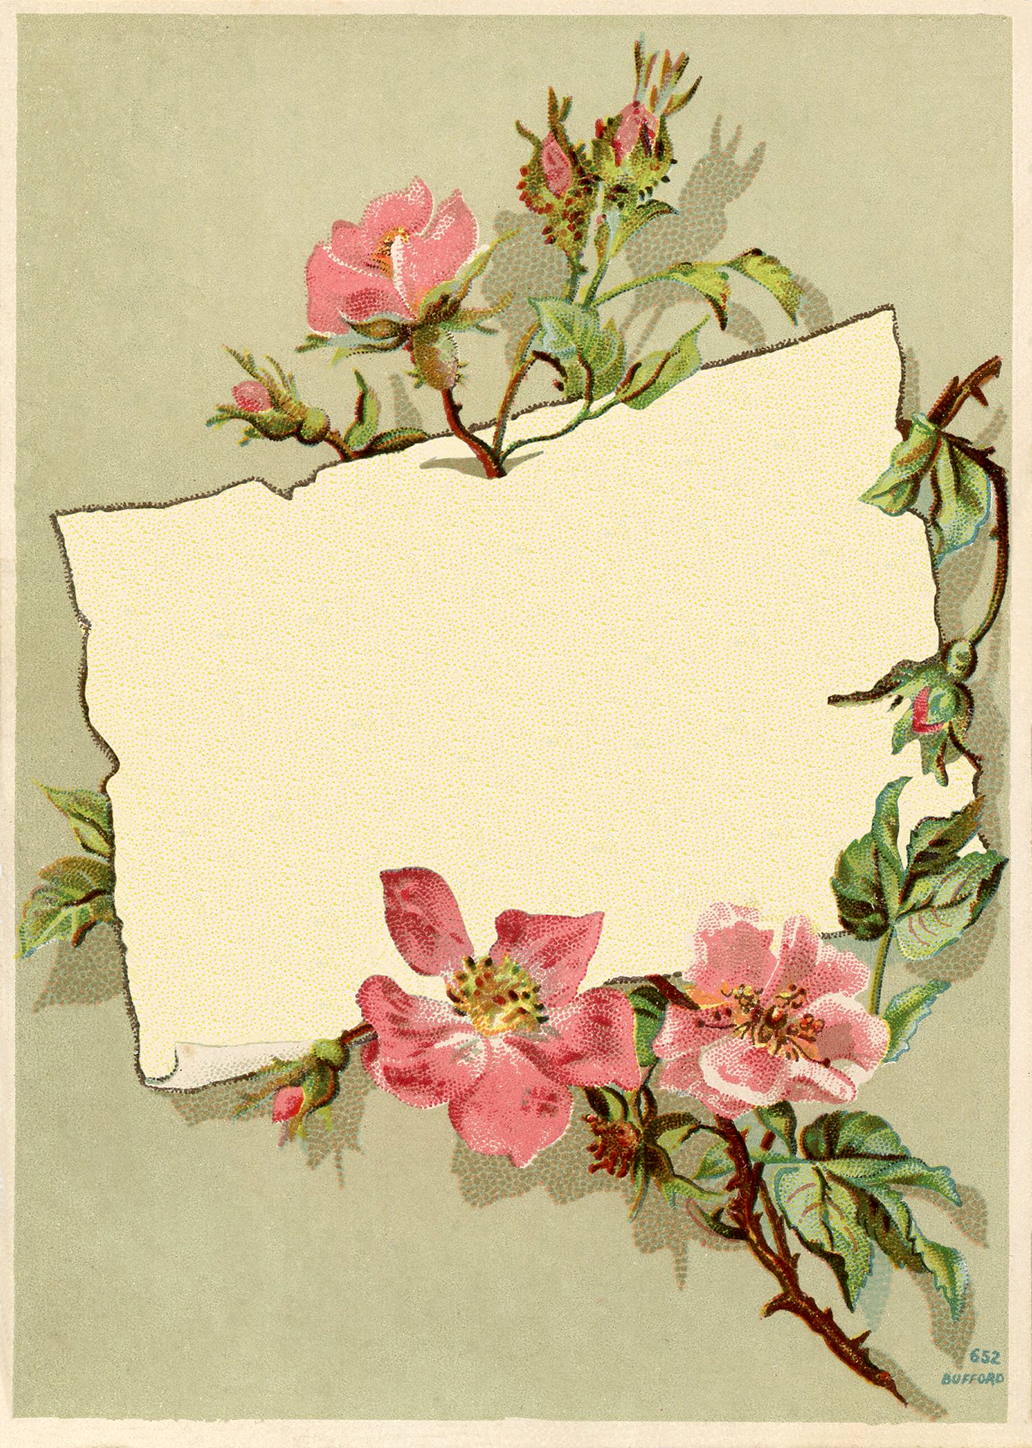 Vintage Rose Frame Images The Graphics Fairy